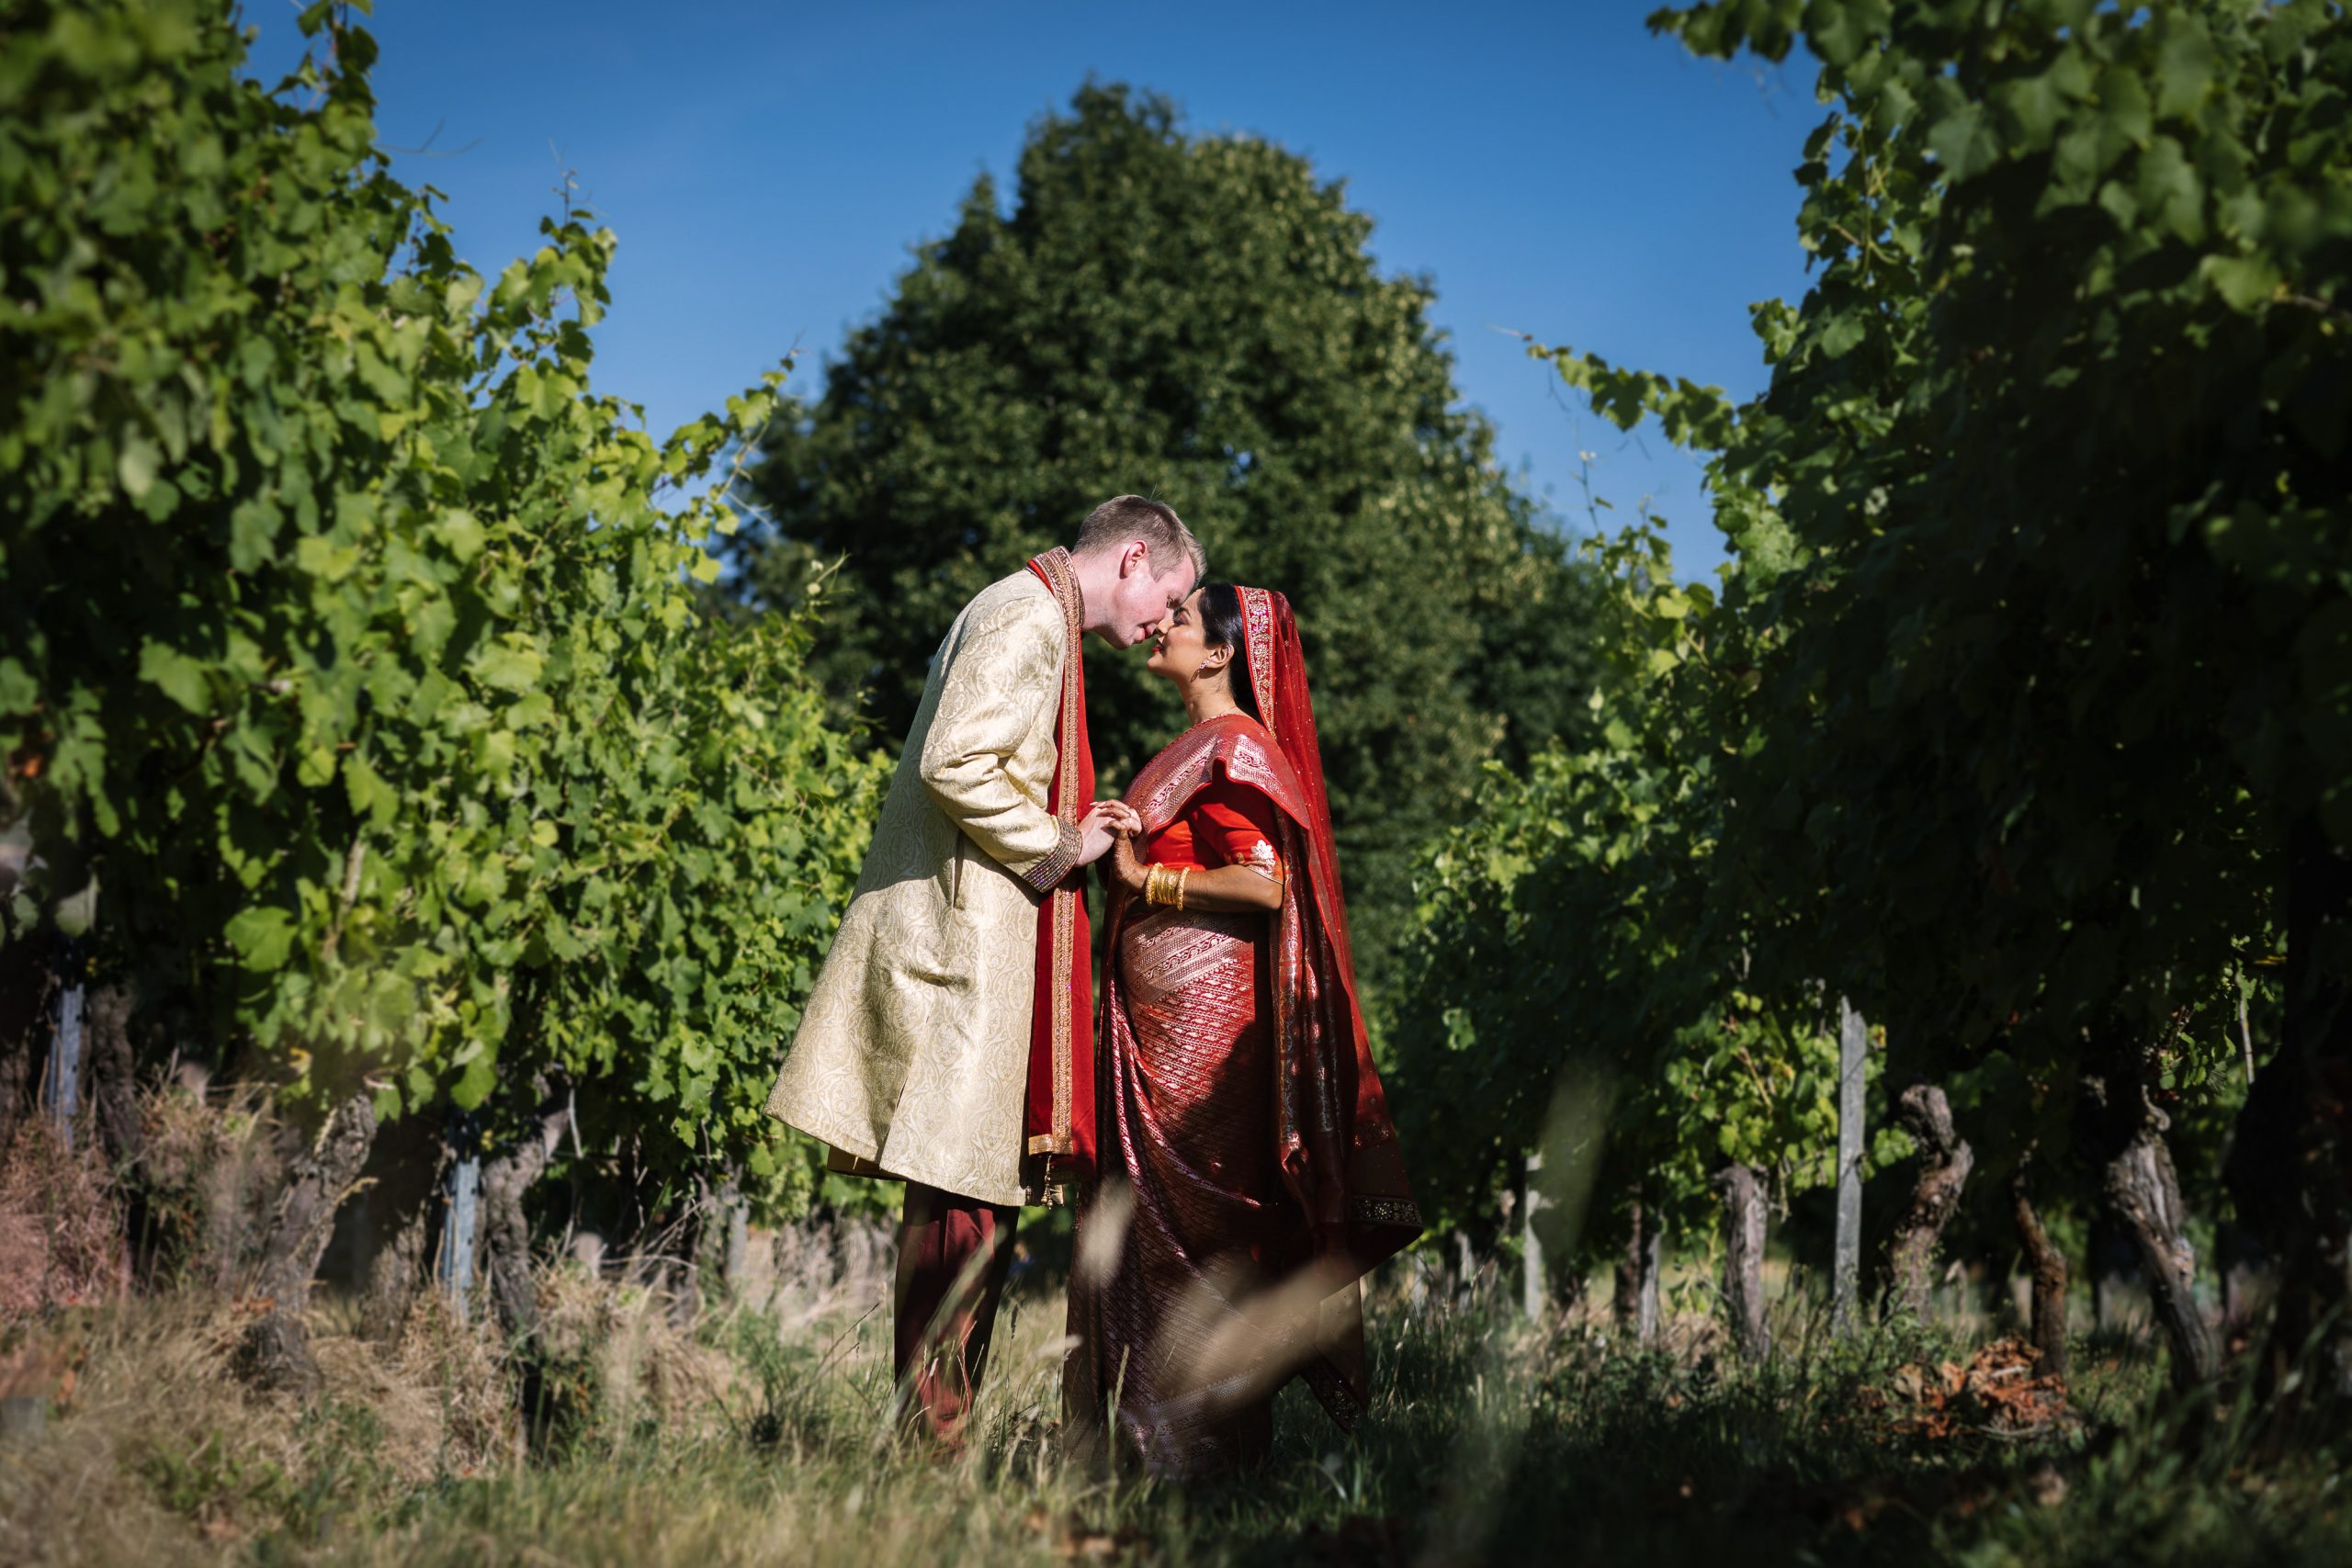 bride and groom portrait indian fusion wedding at denbies vineyard dorking natural unposed candid wedding photography by LGBTQ_friendly documentary wedding photographer surrey sussex